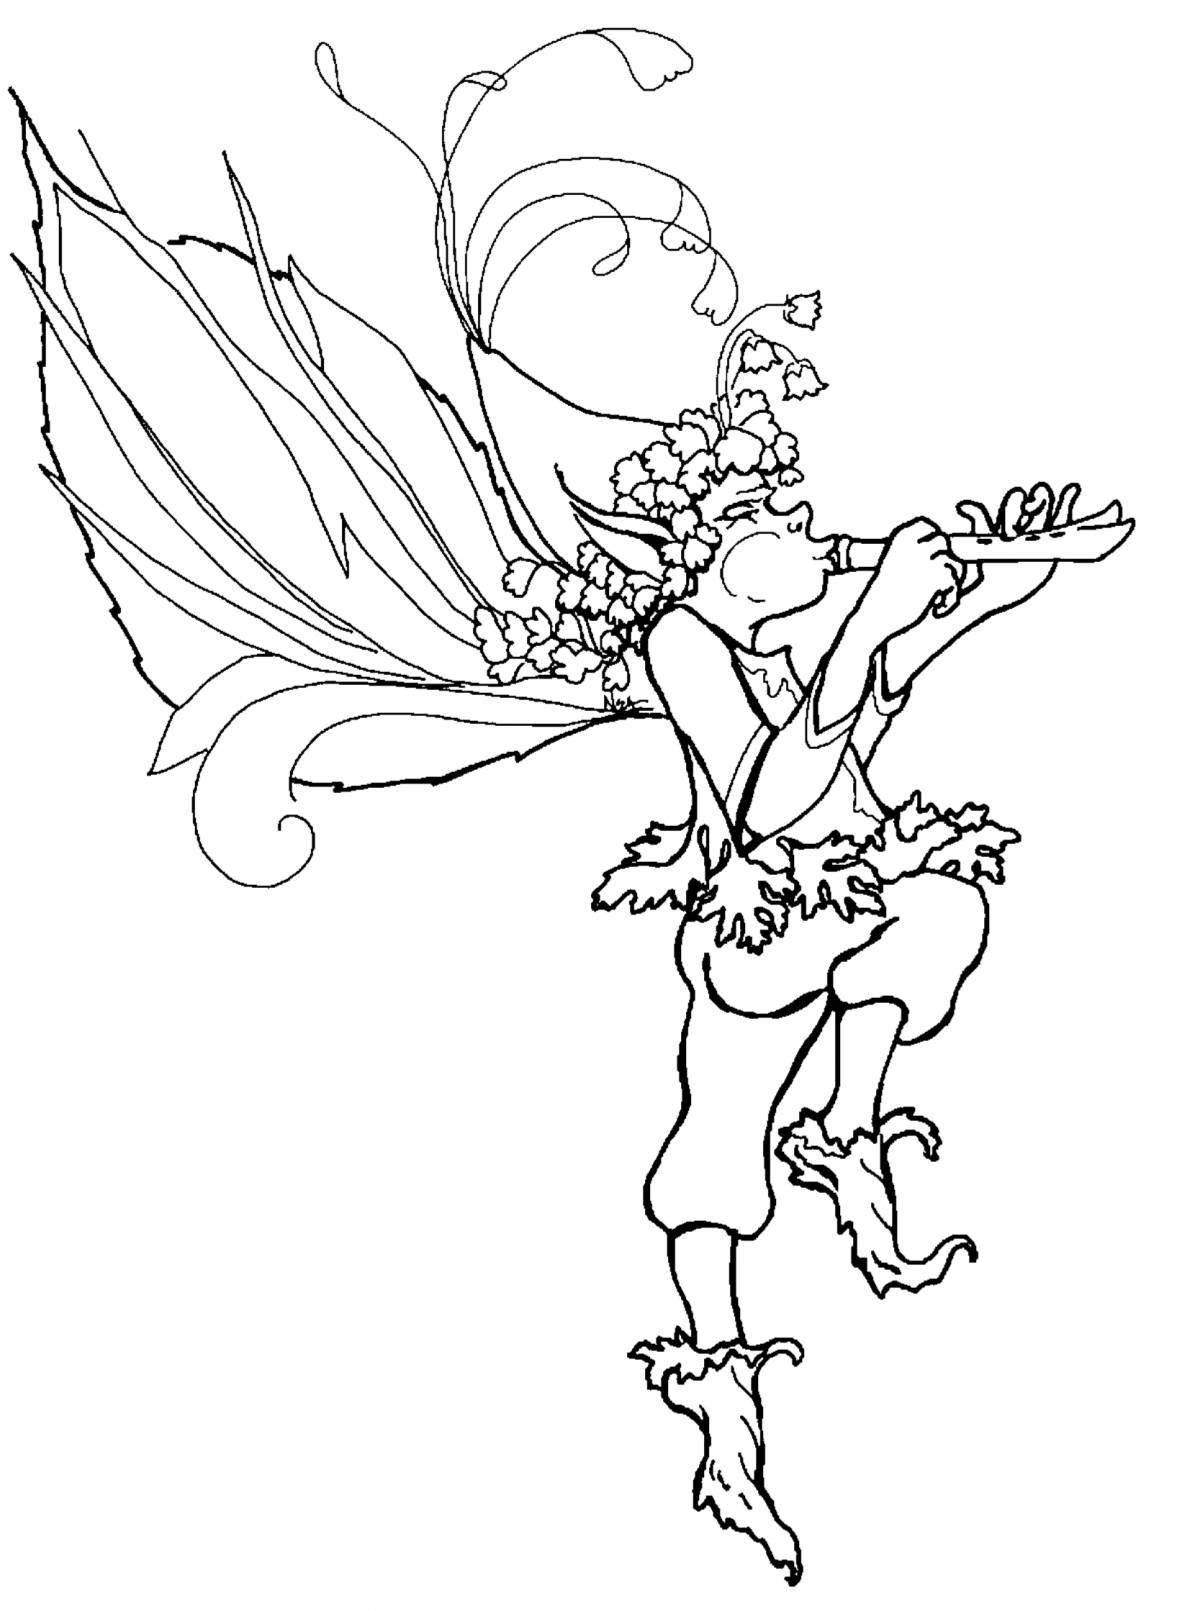 Lego elves playful coloring page